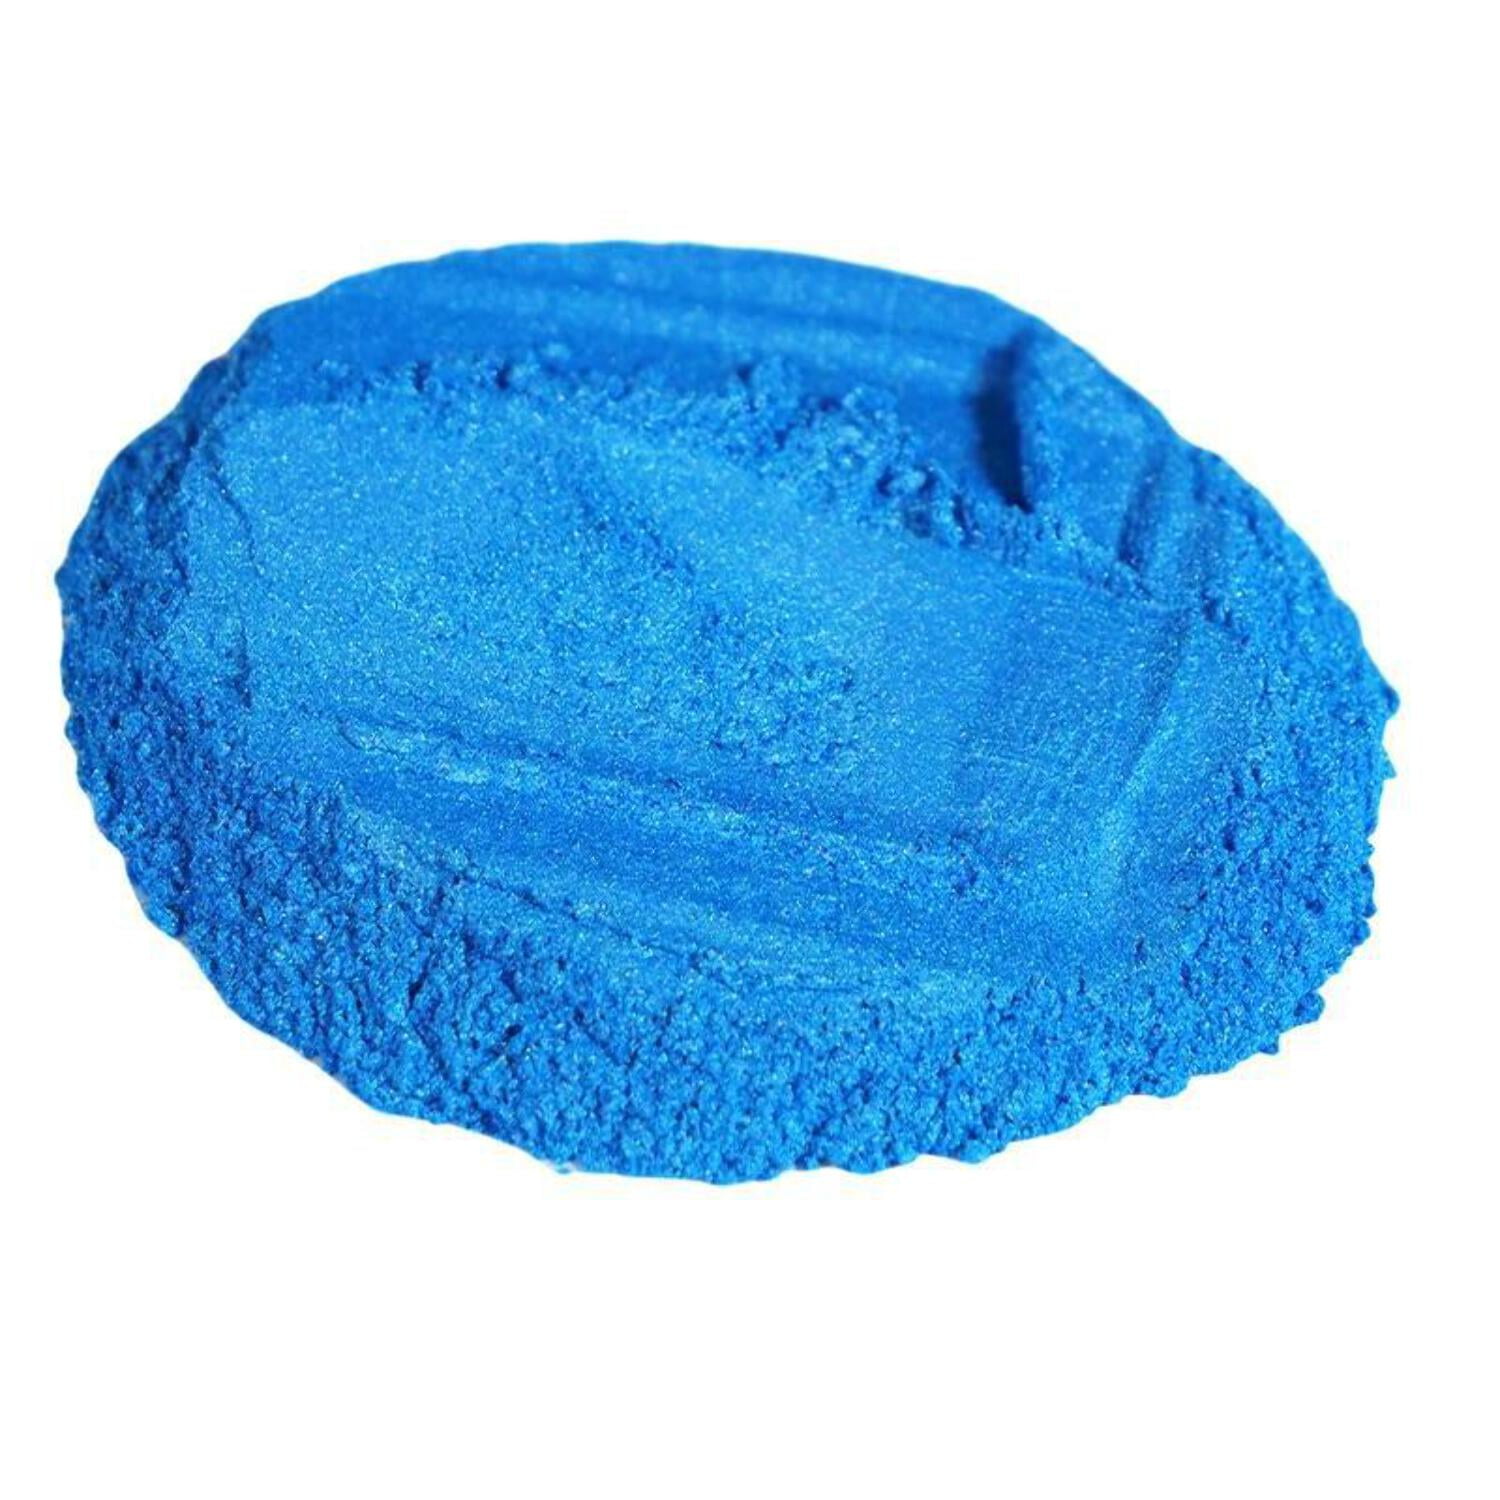 Epoxy Resin Color Pigment - Crystal Blue 50g - Mica Powder - Tint dye —  BALTIC DAY